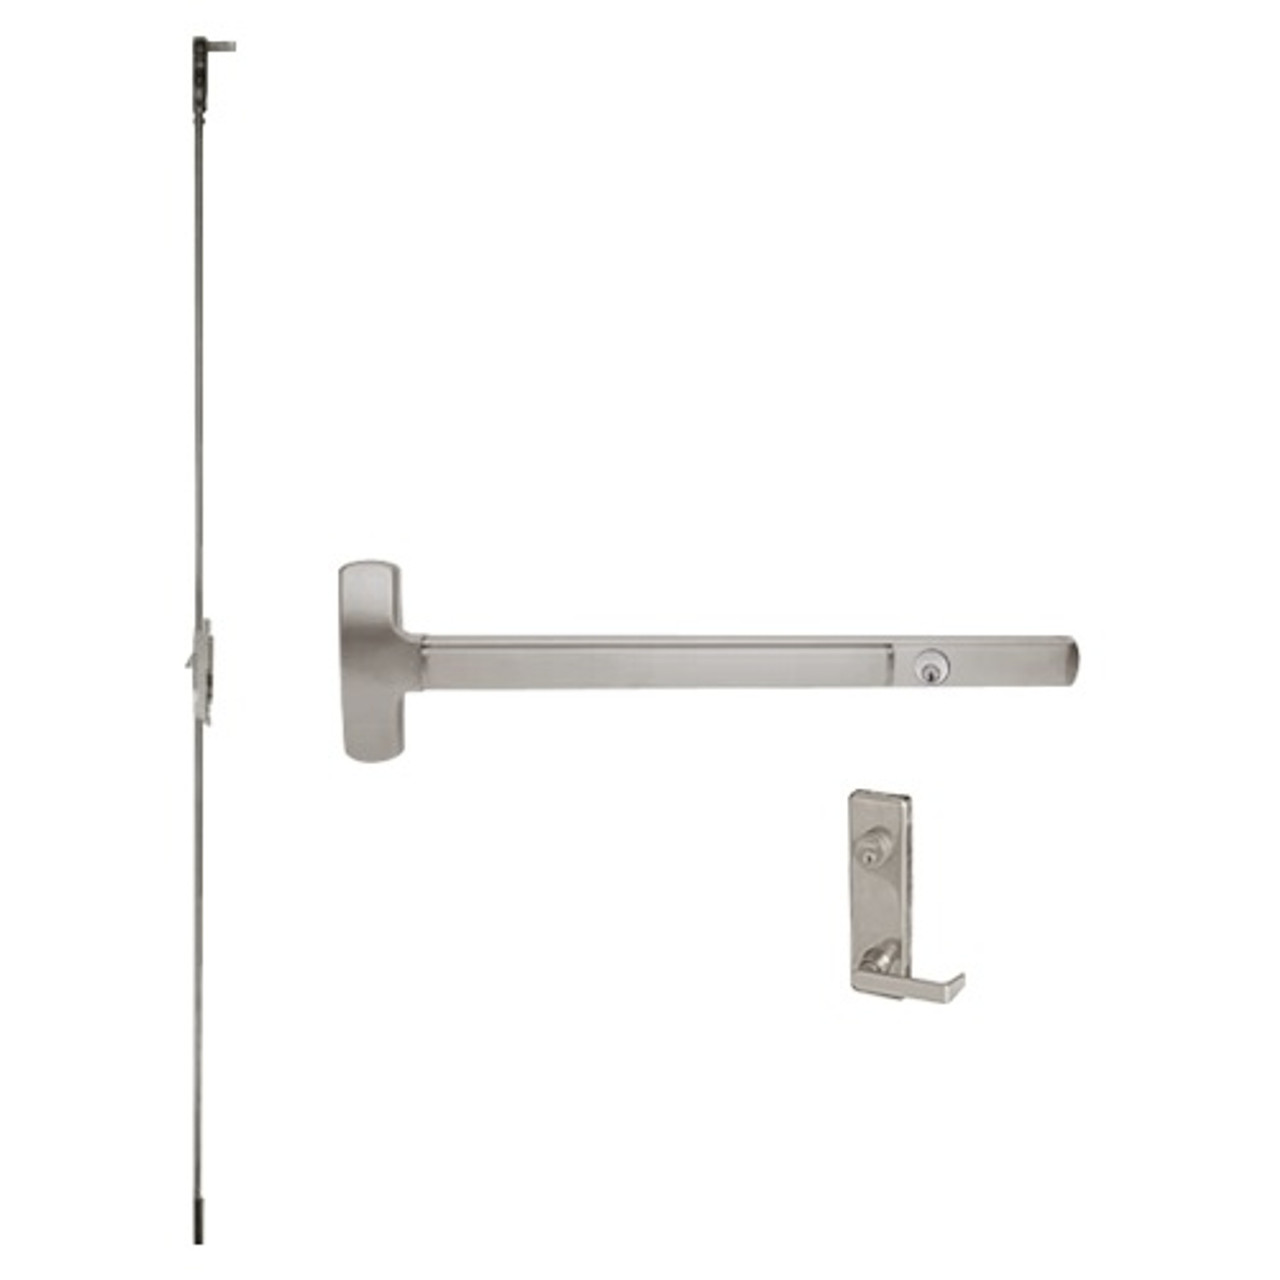 CD25-C-L-DANE-US32D-3-LHR Falcon Exit Device in Satin Stainless Steel